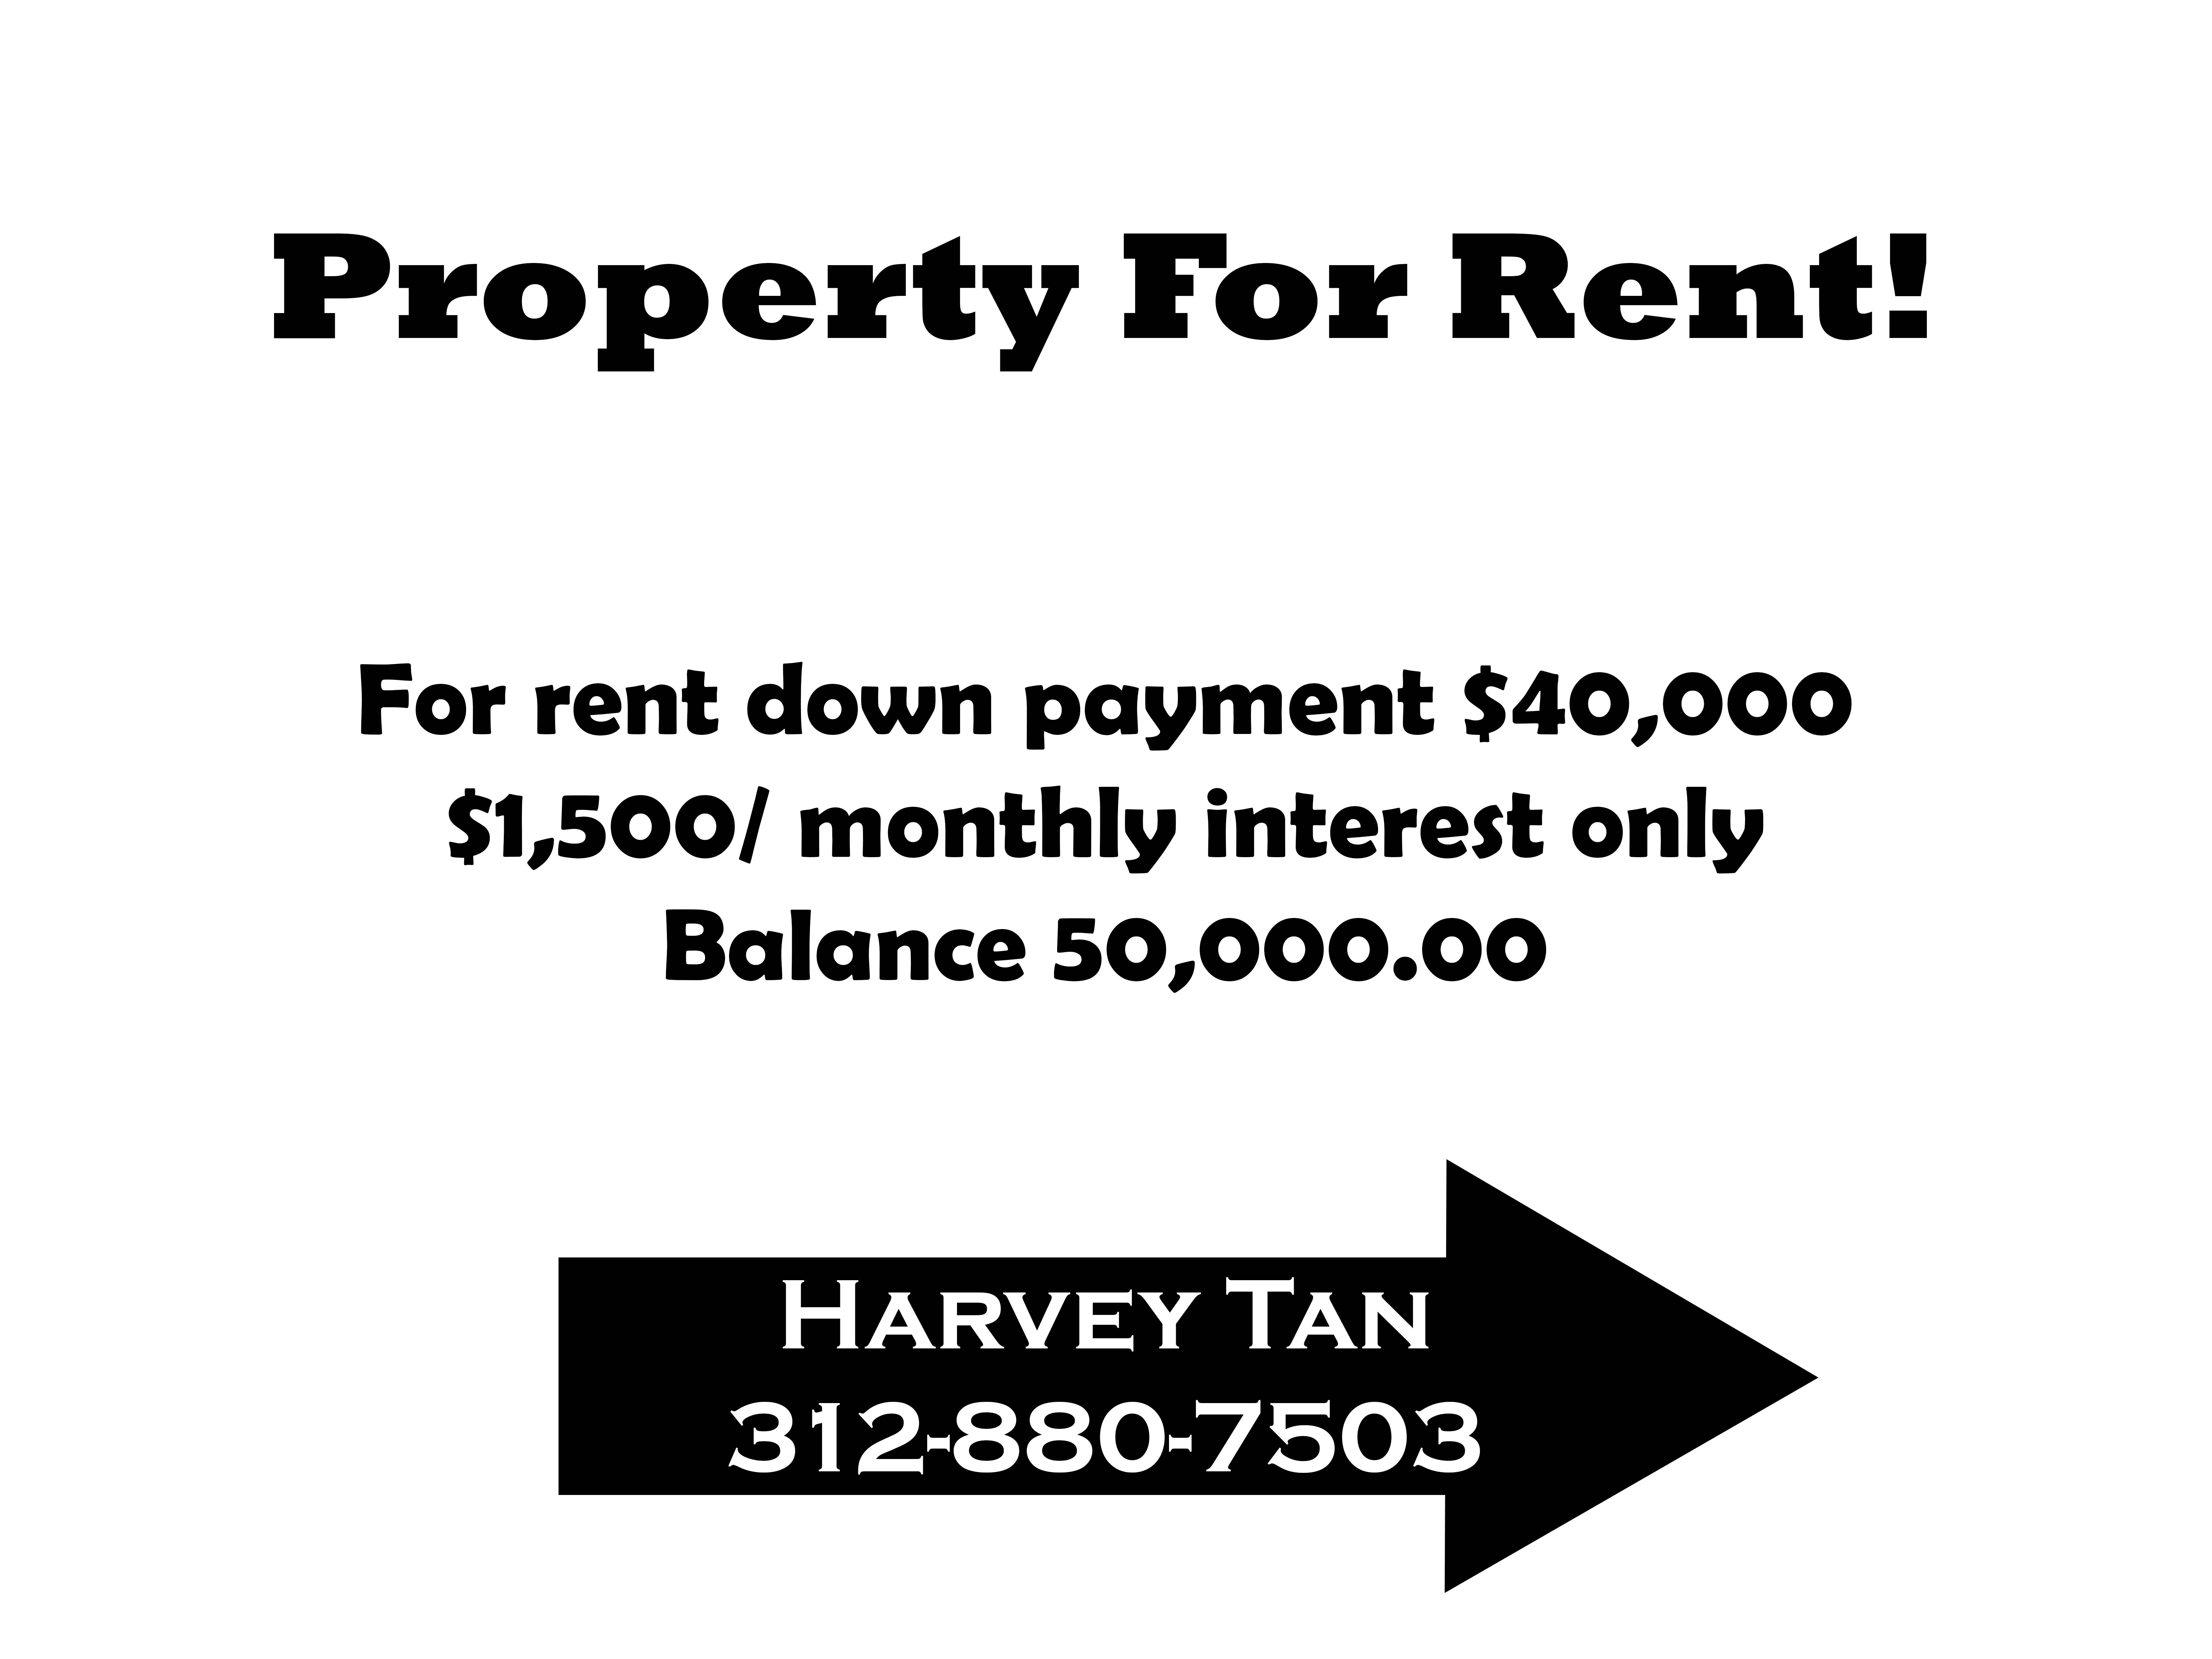 Property For Rent!